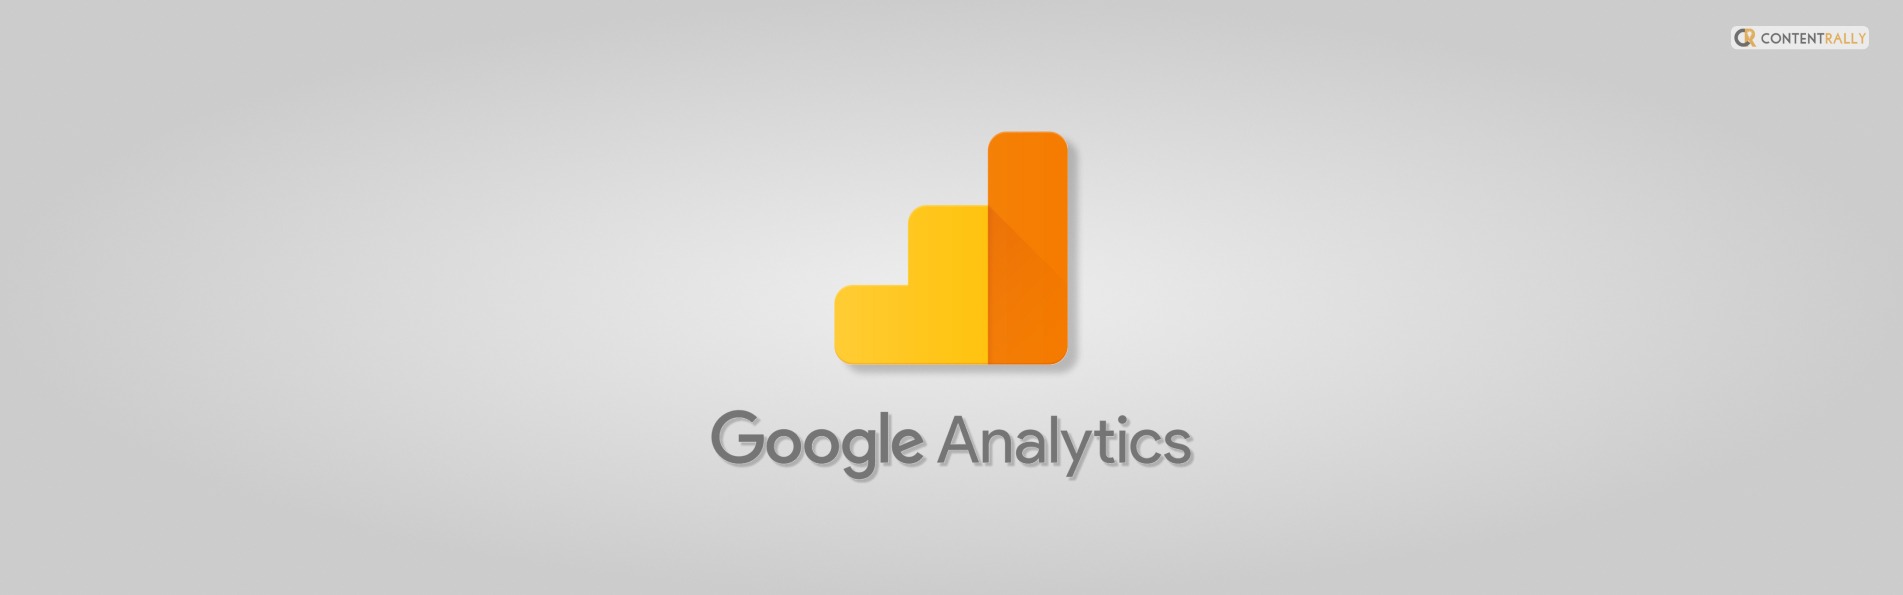 to increase the speed at which google analytics compiles reports, what action could be taken